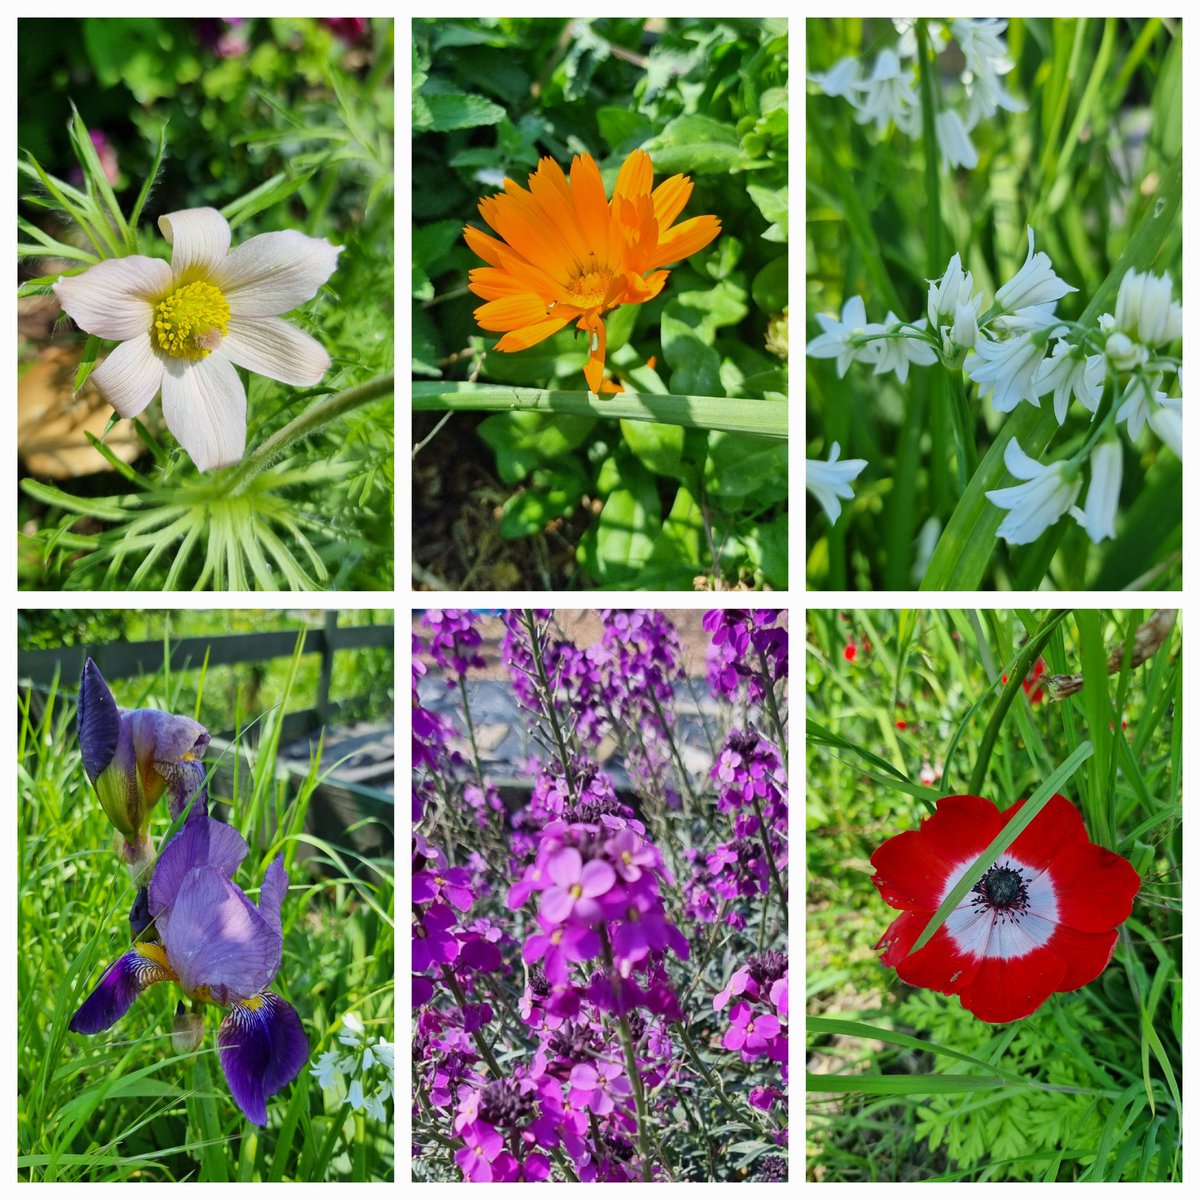 Beautiful colours on display in The Garden Project.
#schoolgardening